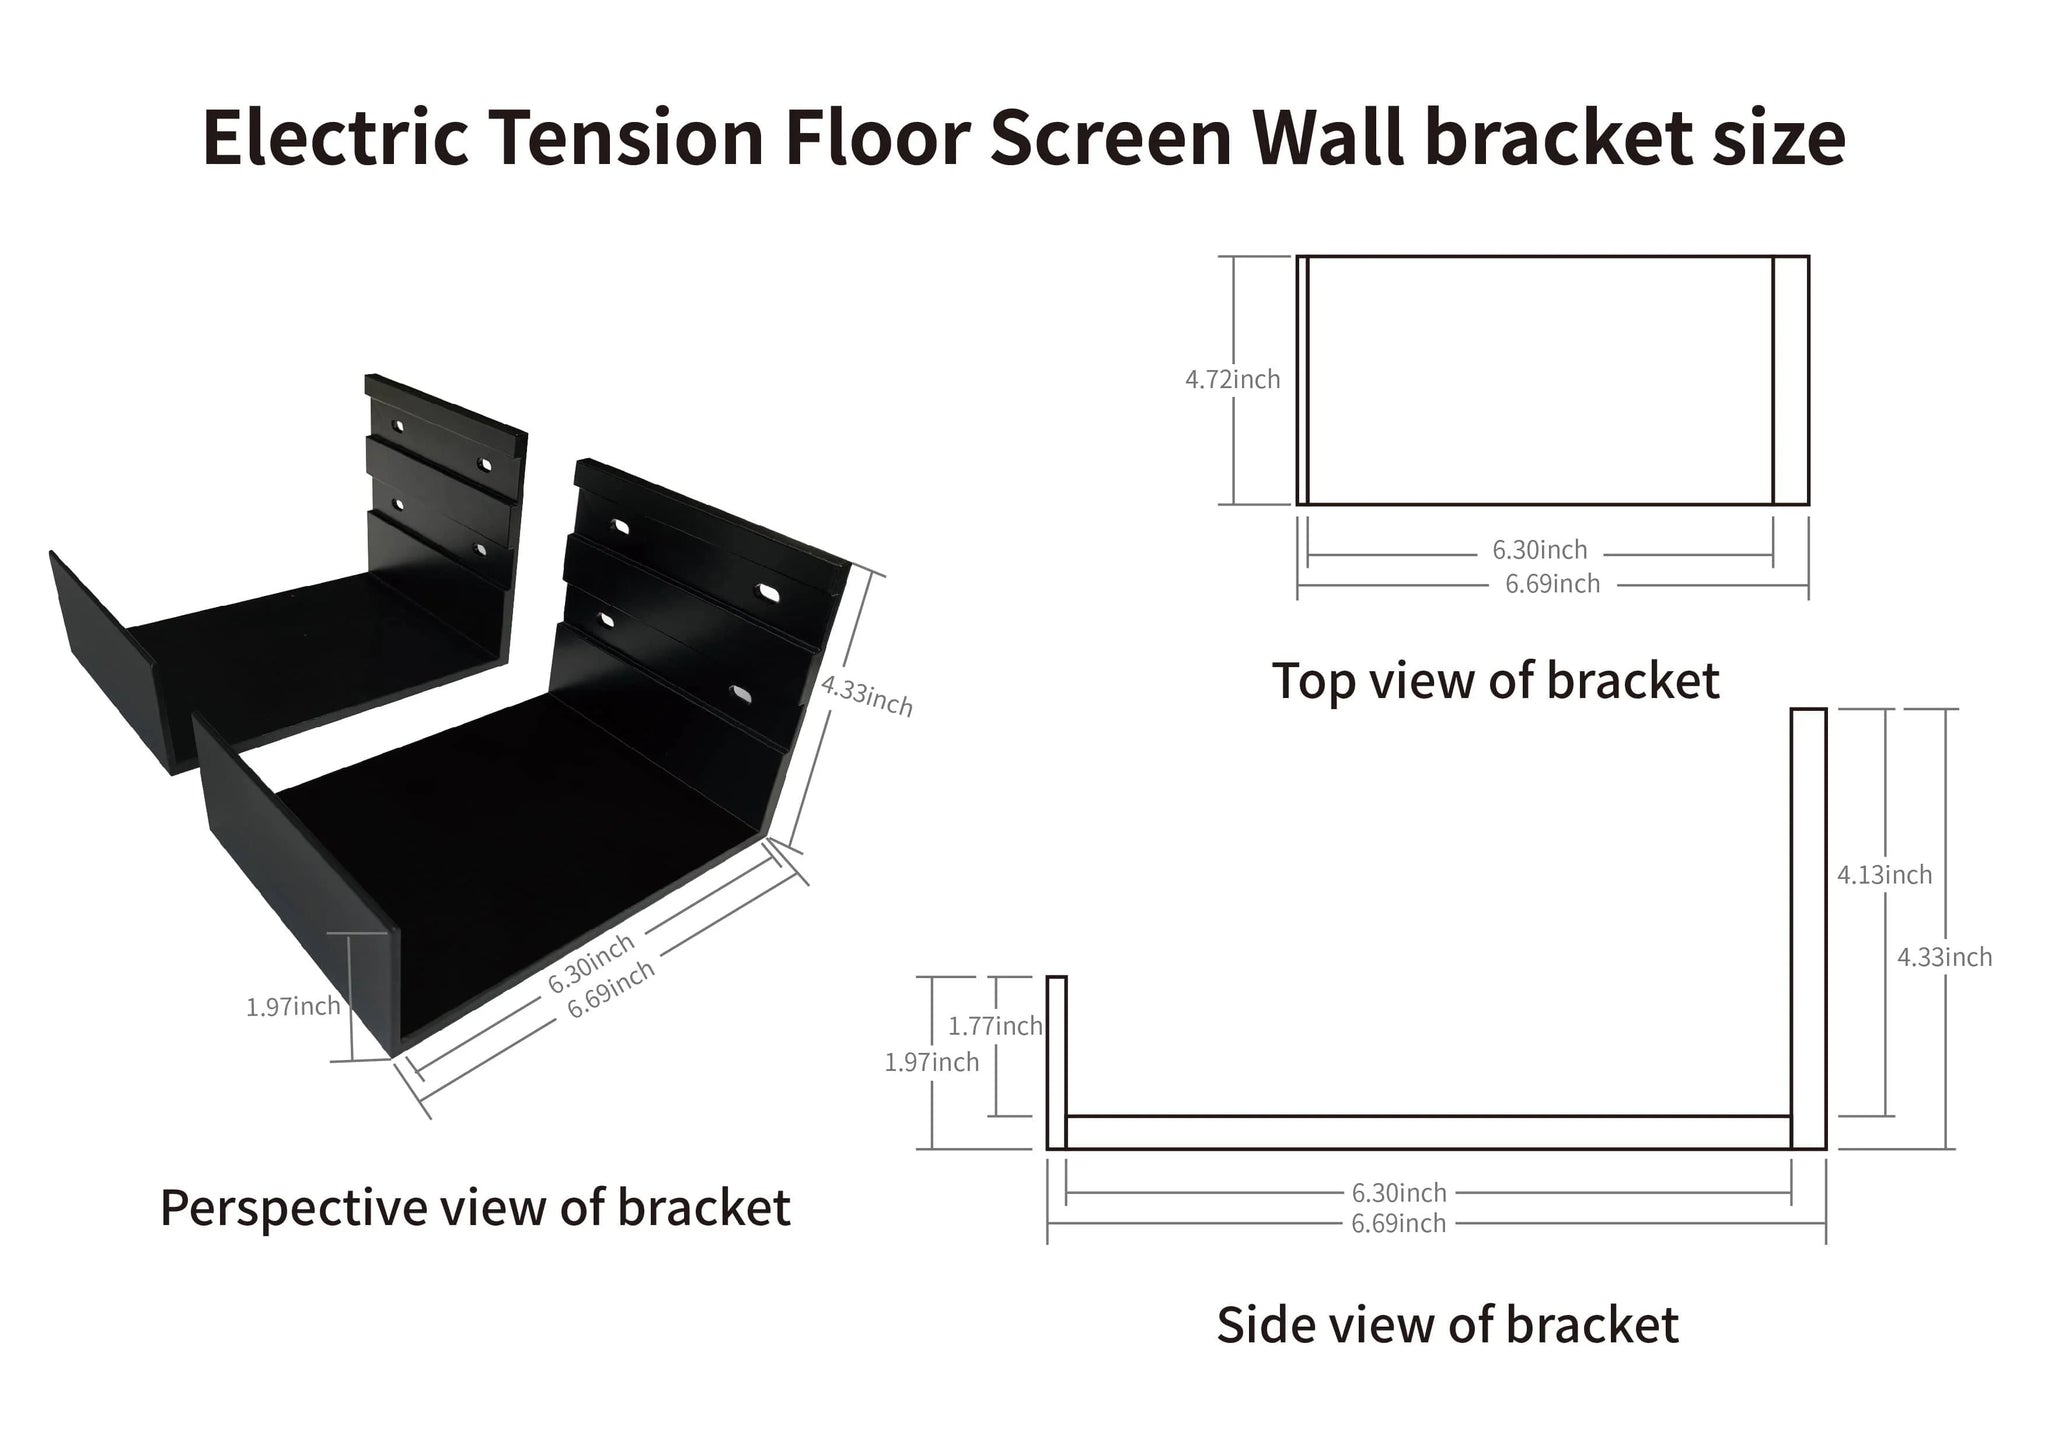 Vividstorm Wall Mount Brackets for Electric Tension Floor Rising Screens (1 Pair)